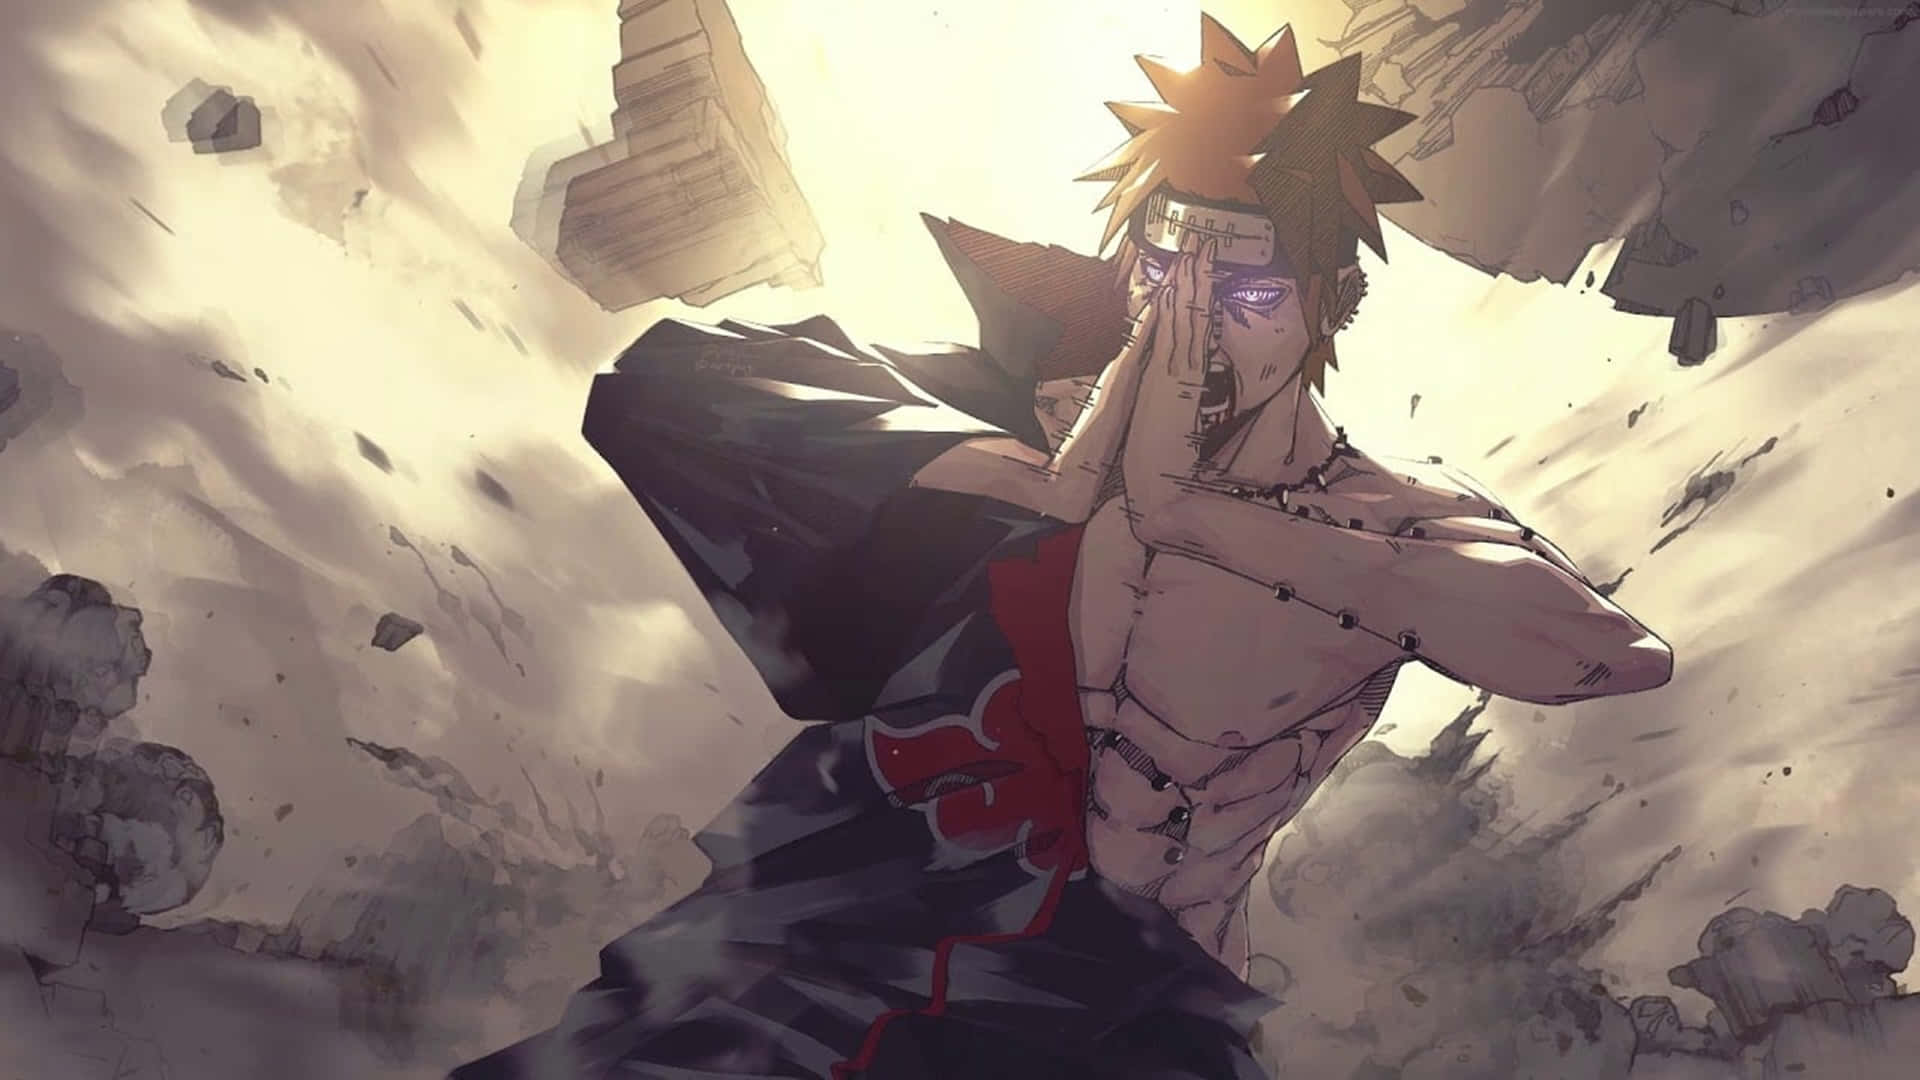 Naruto And Pain Facing Down Devastating Futures Background